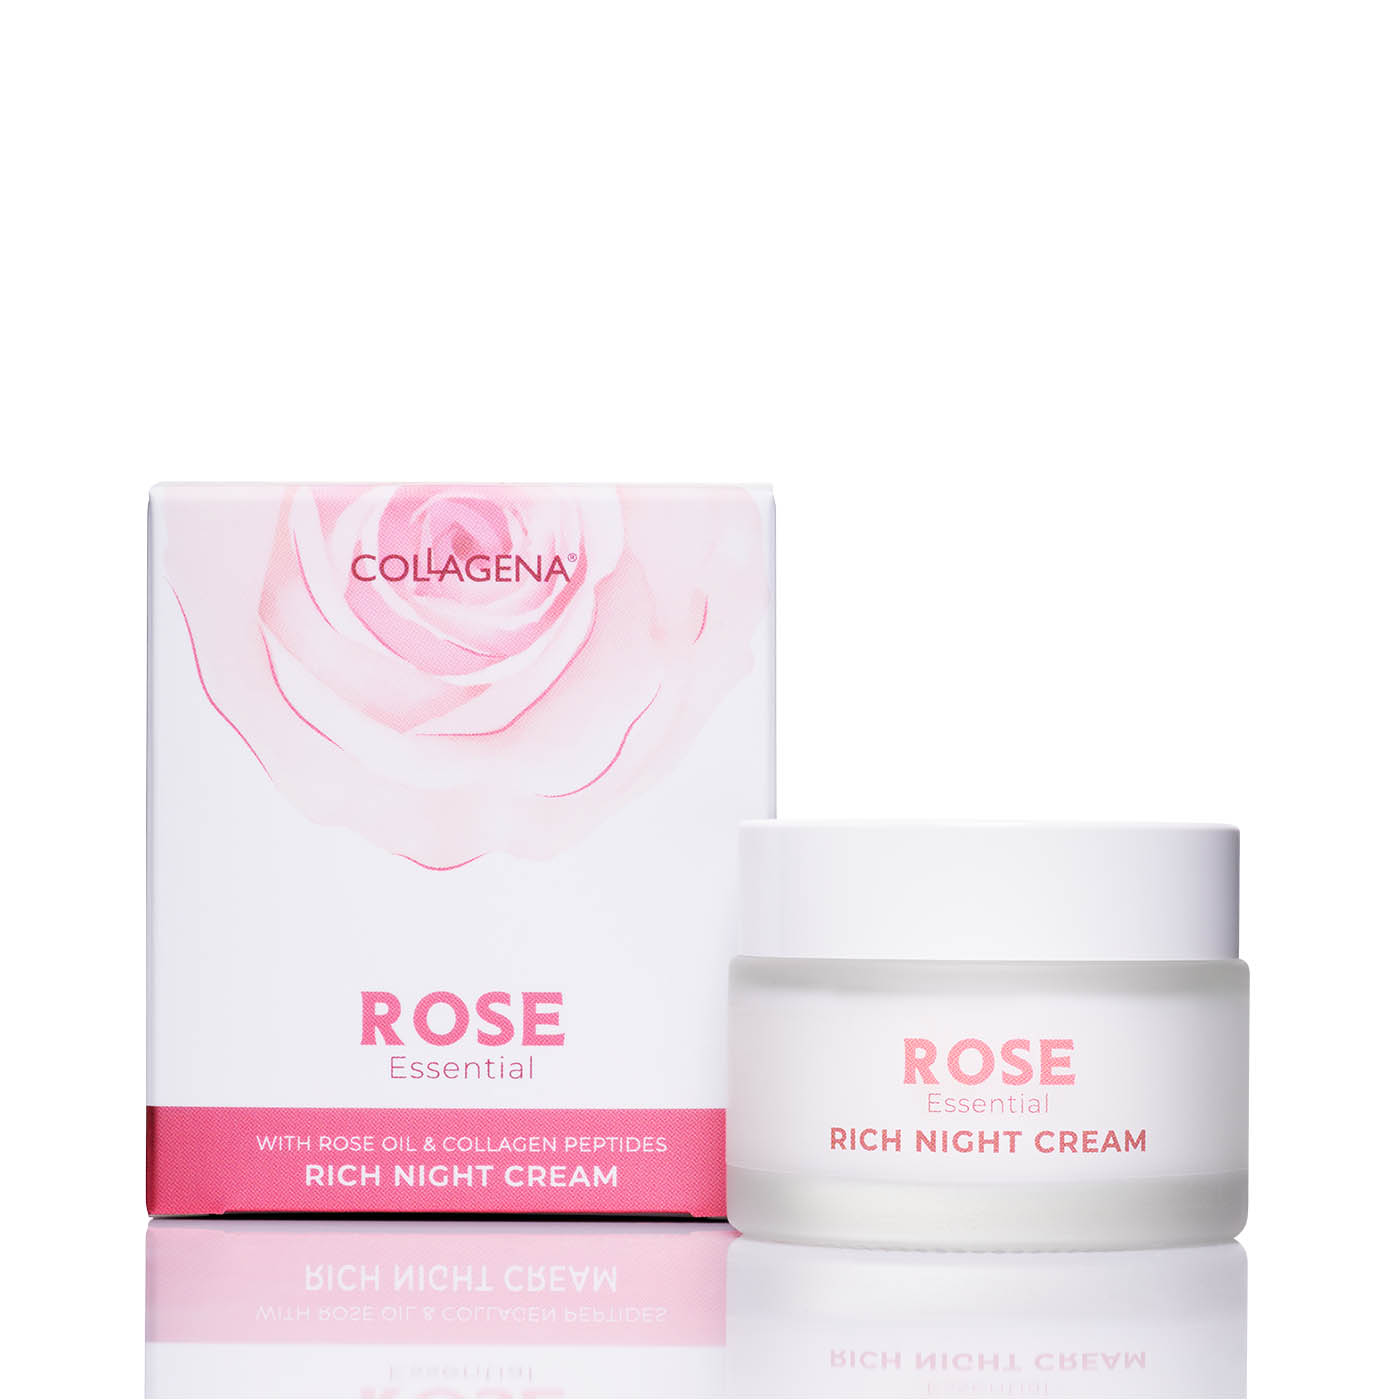 Rich Night Cream with Rose Oil and Collagen Peptides, COLLAGENA Rose Essential, 50 ml